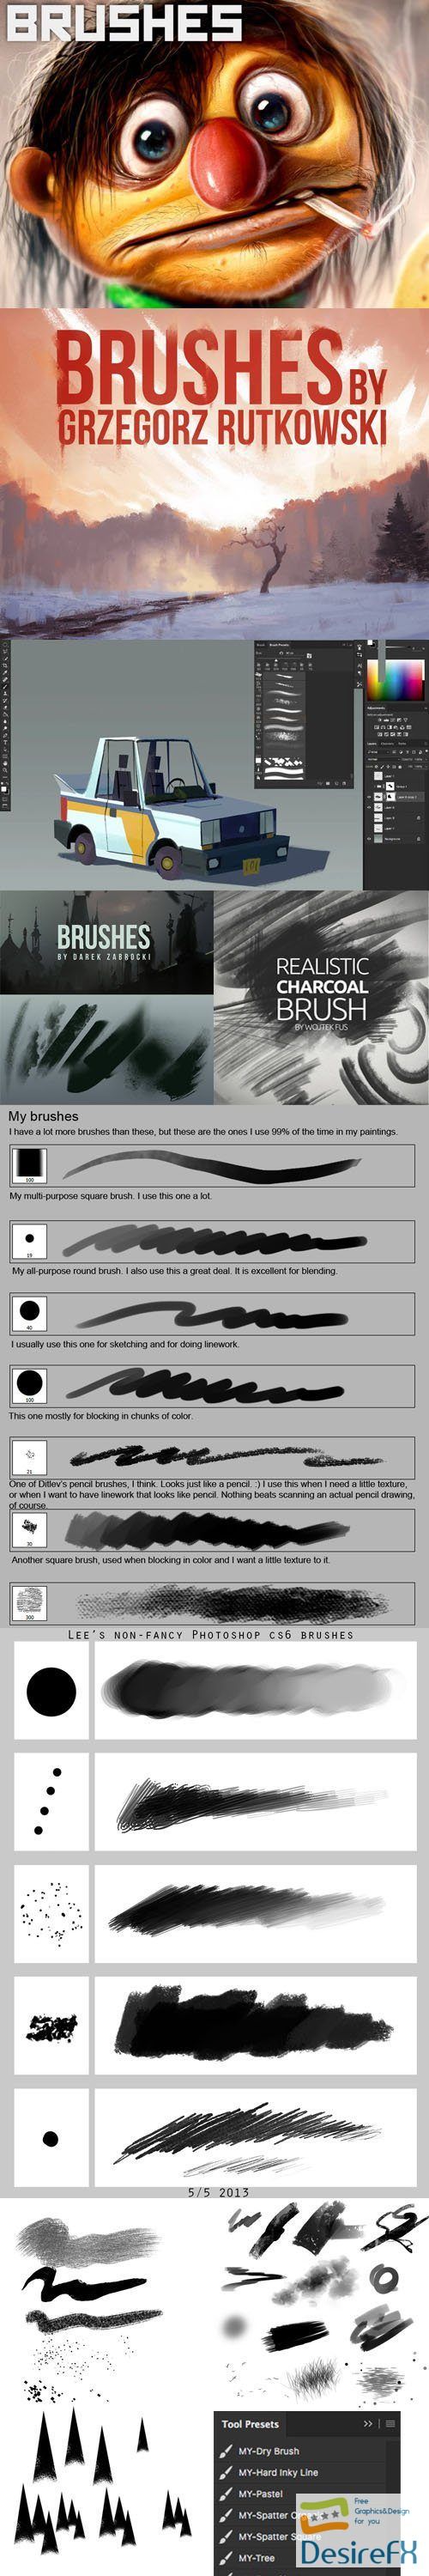 Top 9 Concept Artists Brushes for Photoshop